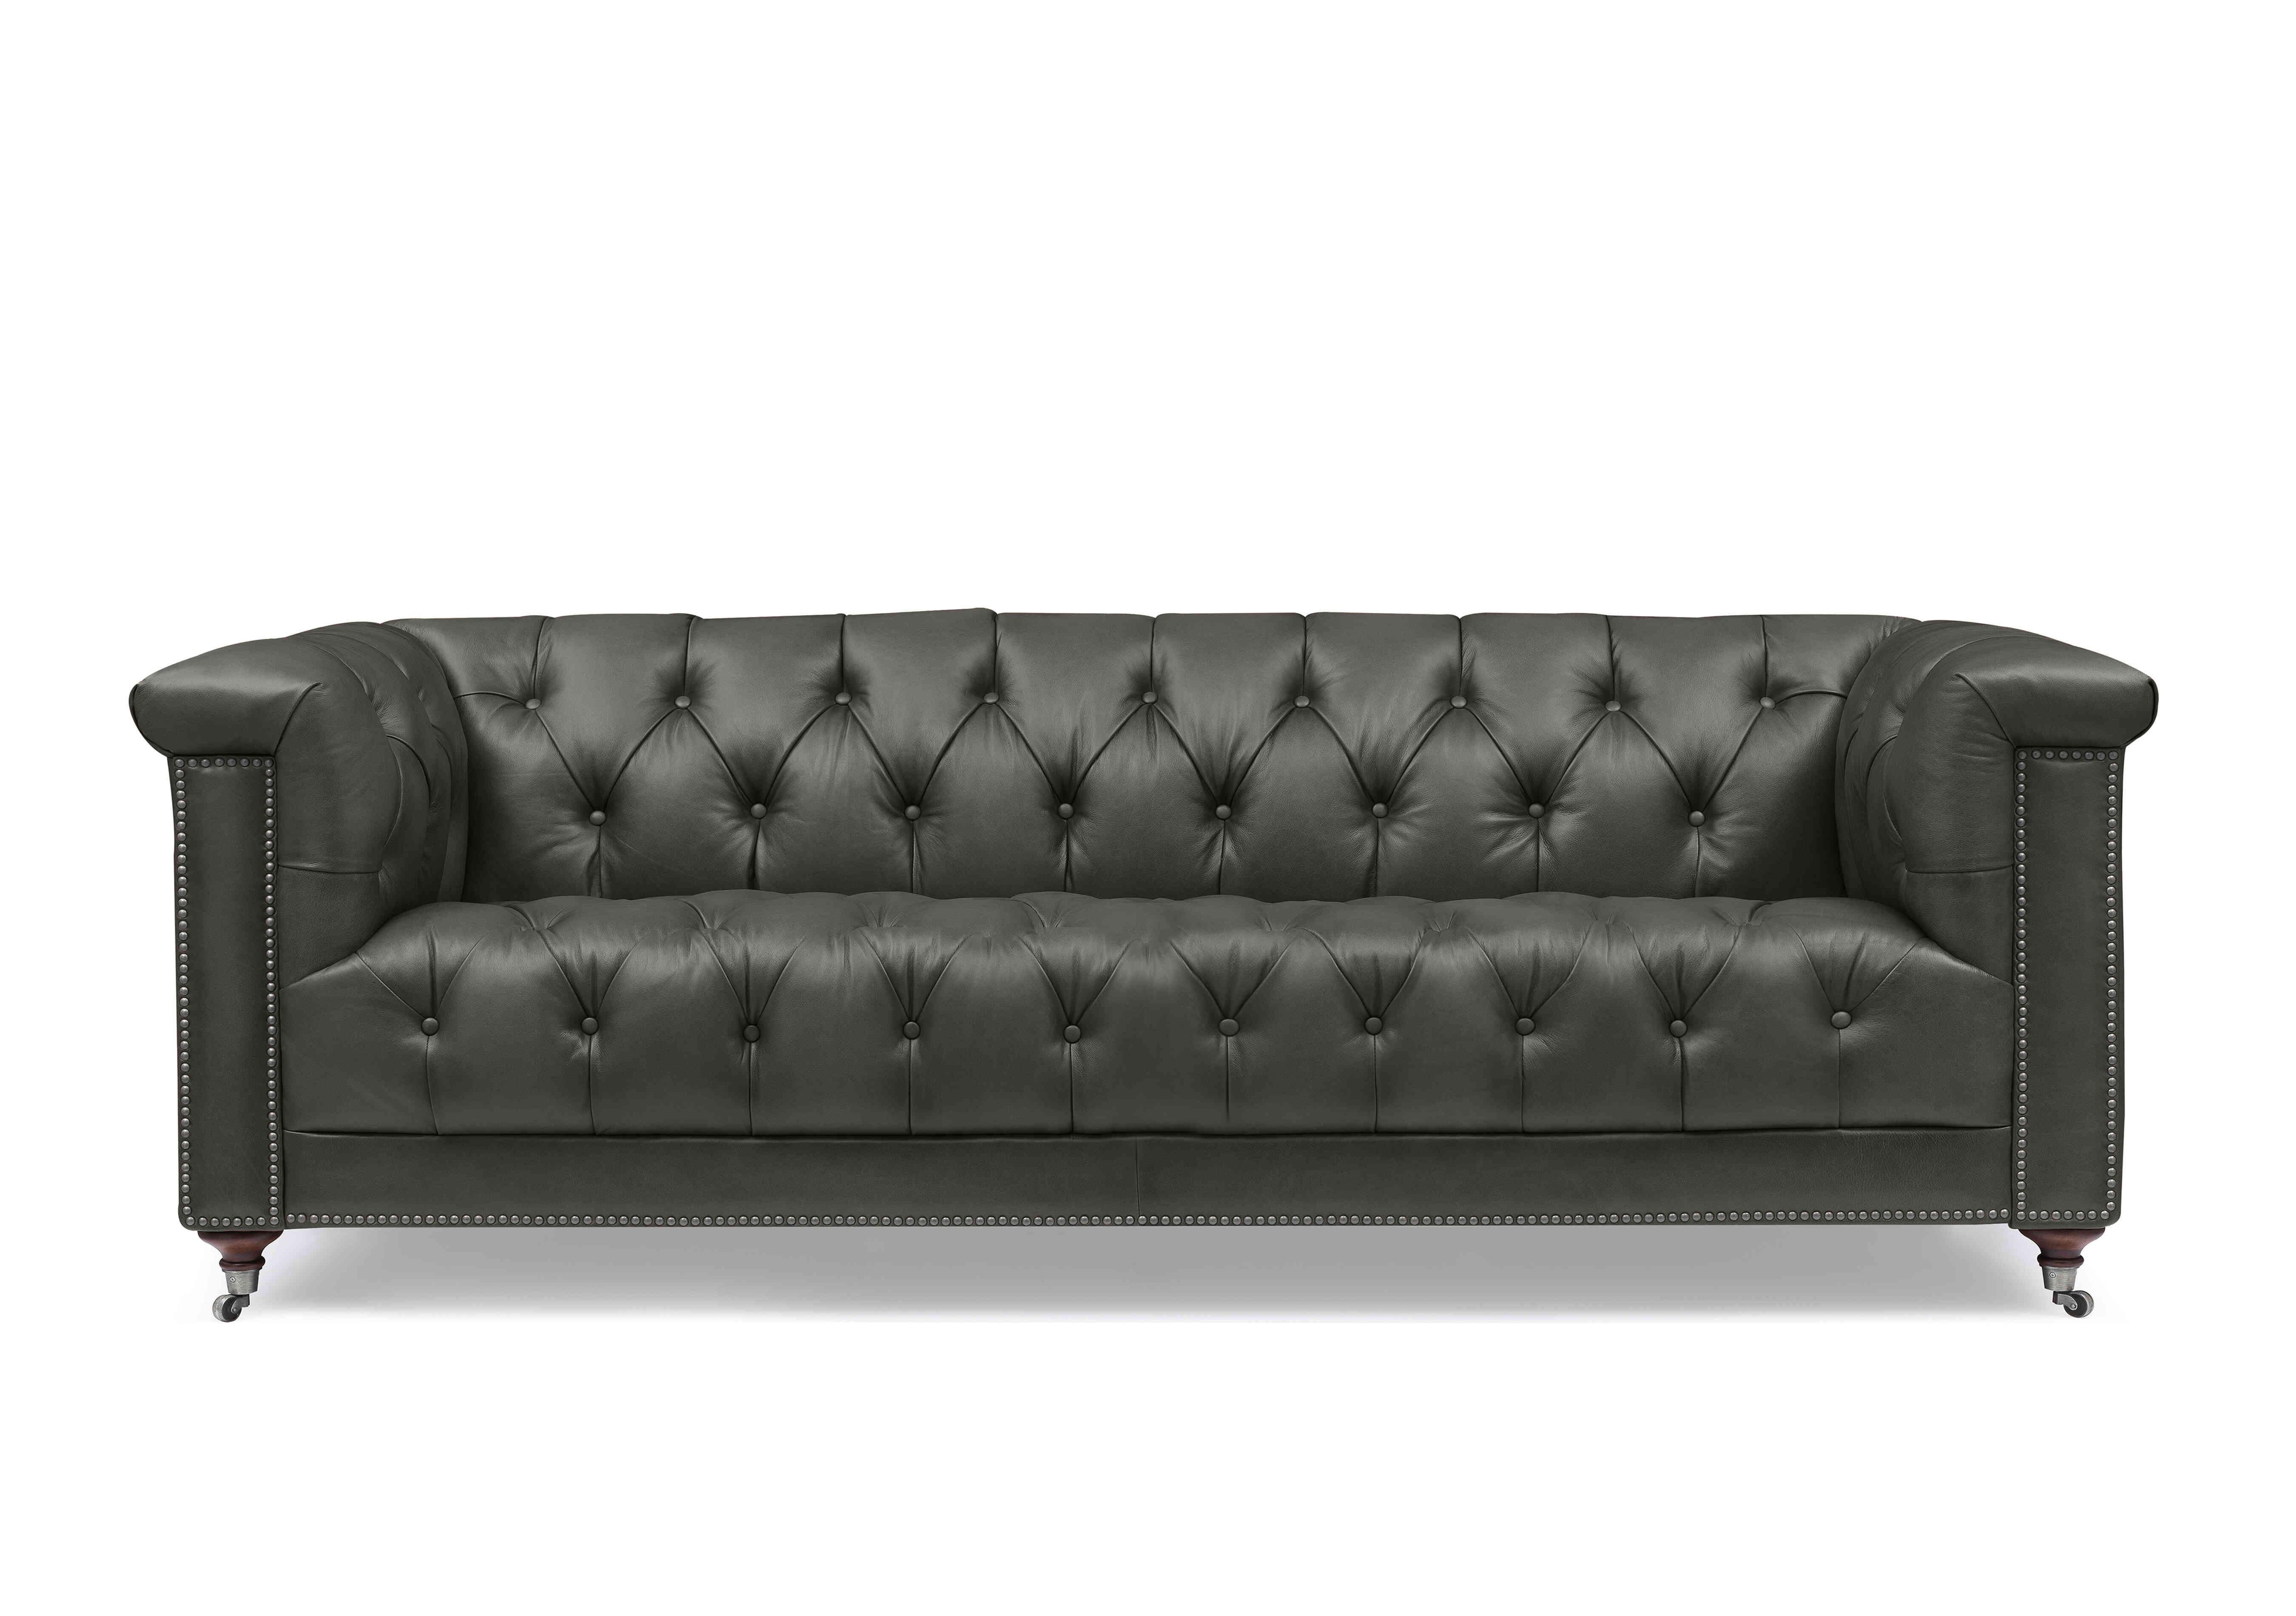 Wallace 4 Seater Leather Chesterfield Sofa in X3y2-1966ls Granite on Furniture Village